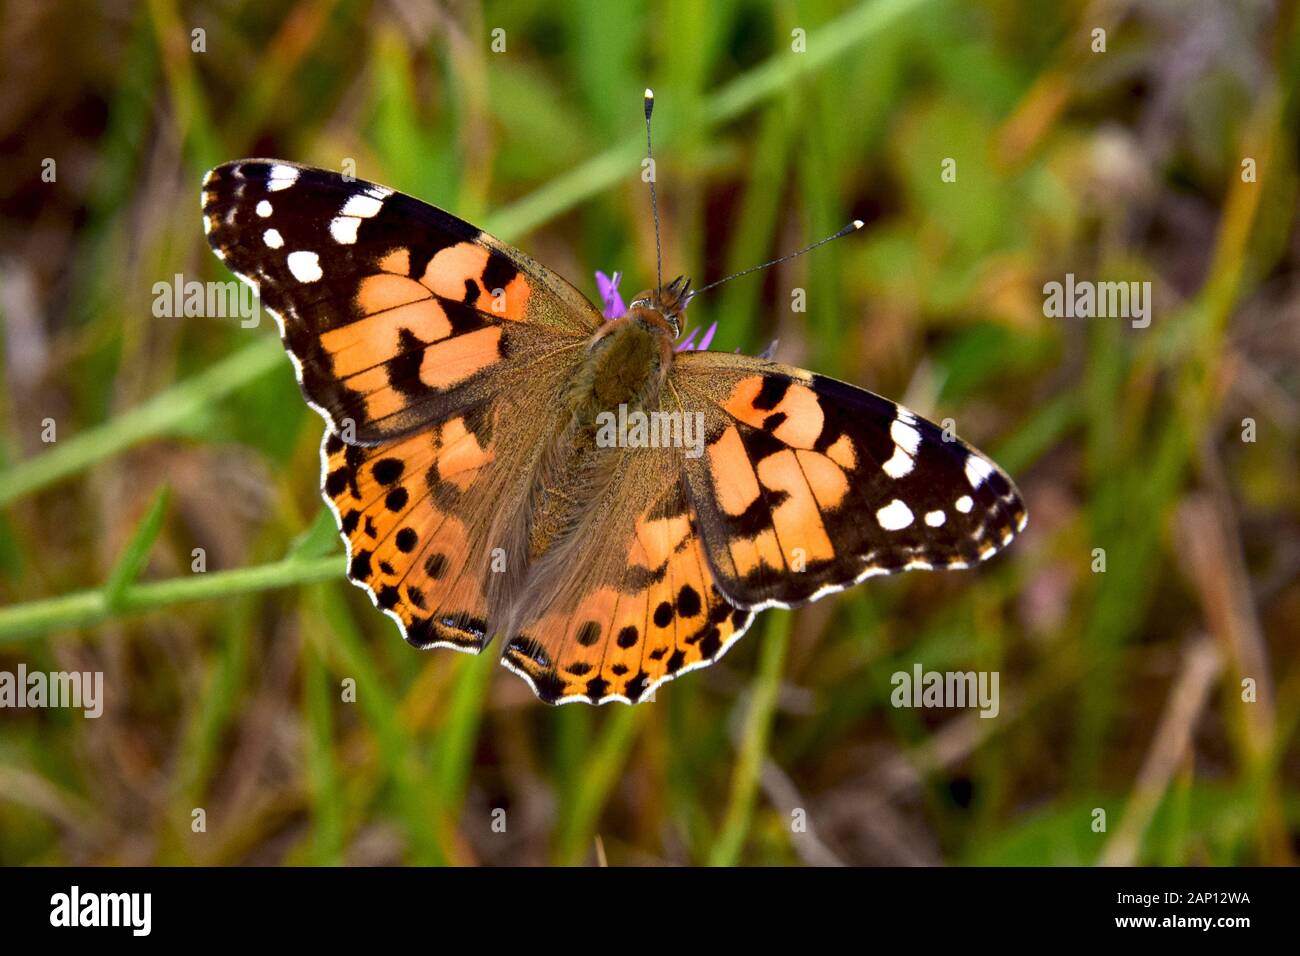 Painted Lady, Thistle Butterfly (Vanessa cardui, Cynthia cardui). Butterfly taking a sunbath. Sweden Stock Photo